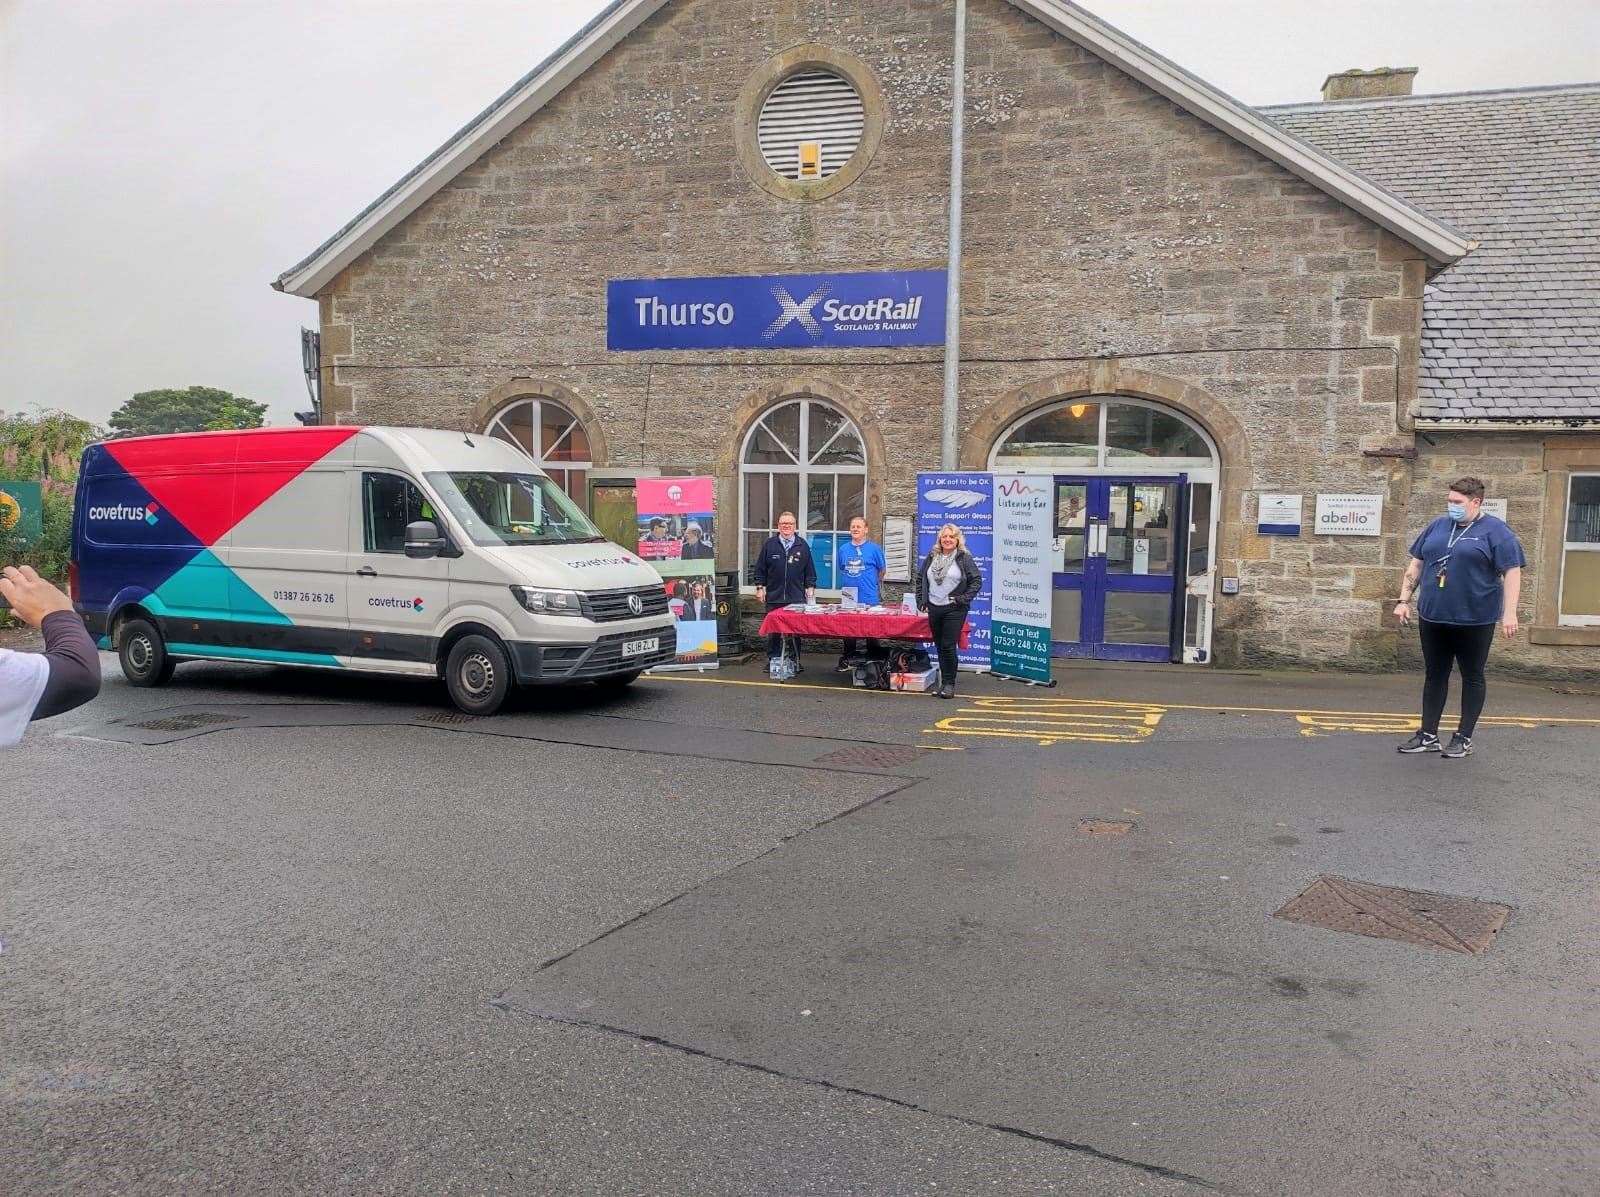 On Friday afternoon volunteers set up a pop-up stall outside Thurso railway station to help raise awareness of suicide prevention.